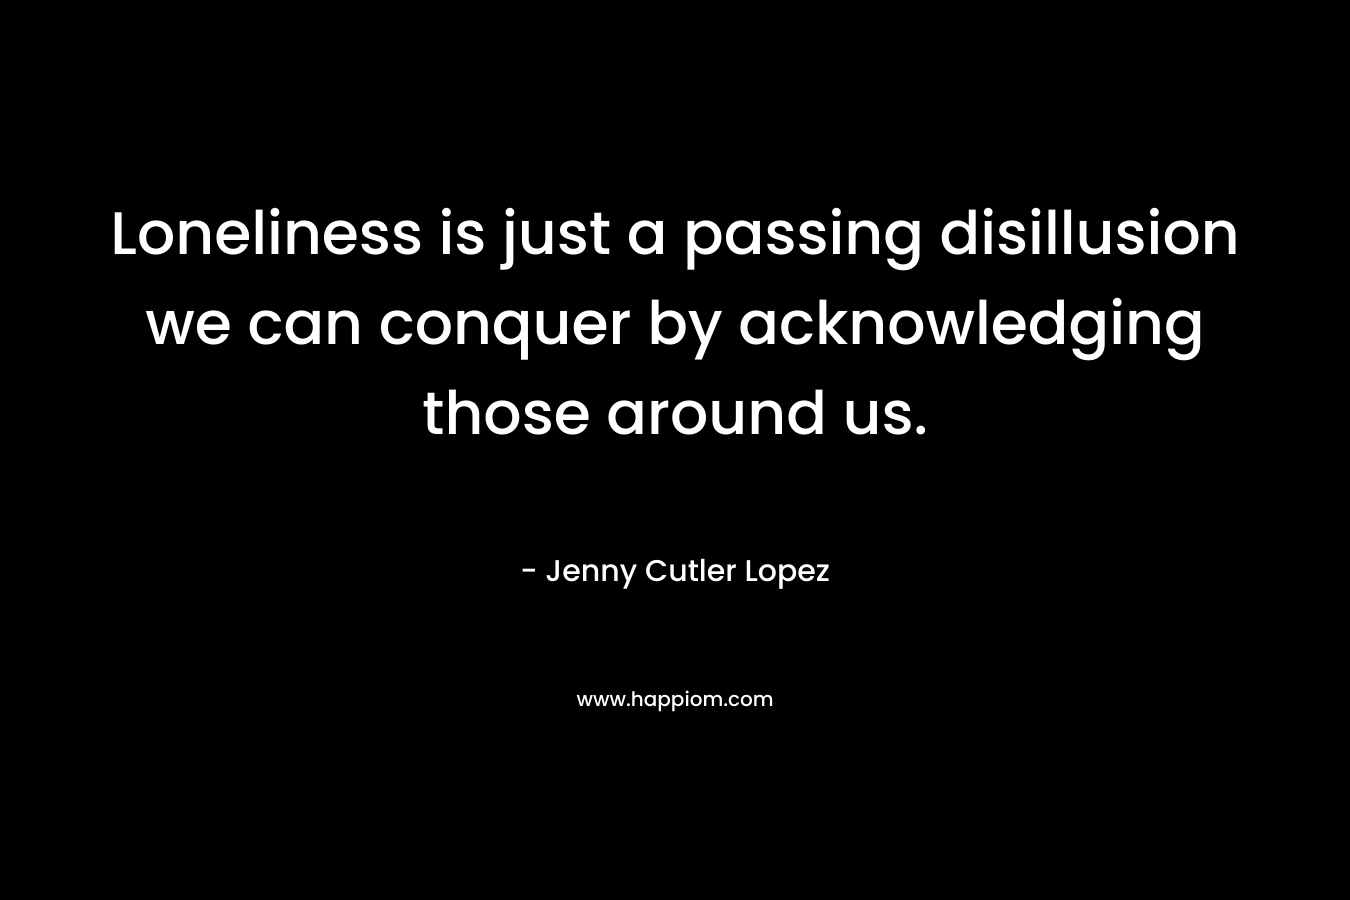 Loneliness is just a passing disillusion we can conquer by acknowledging those around us.